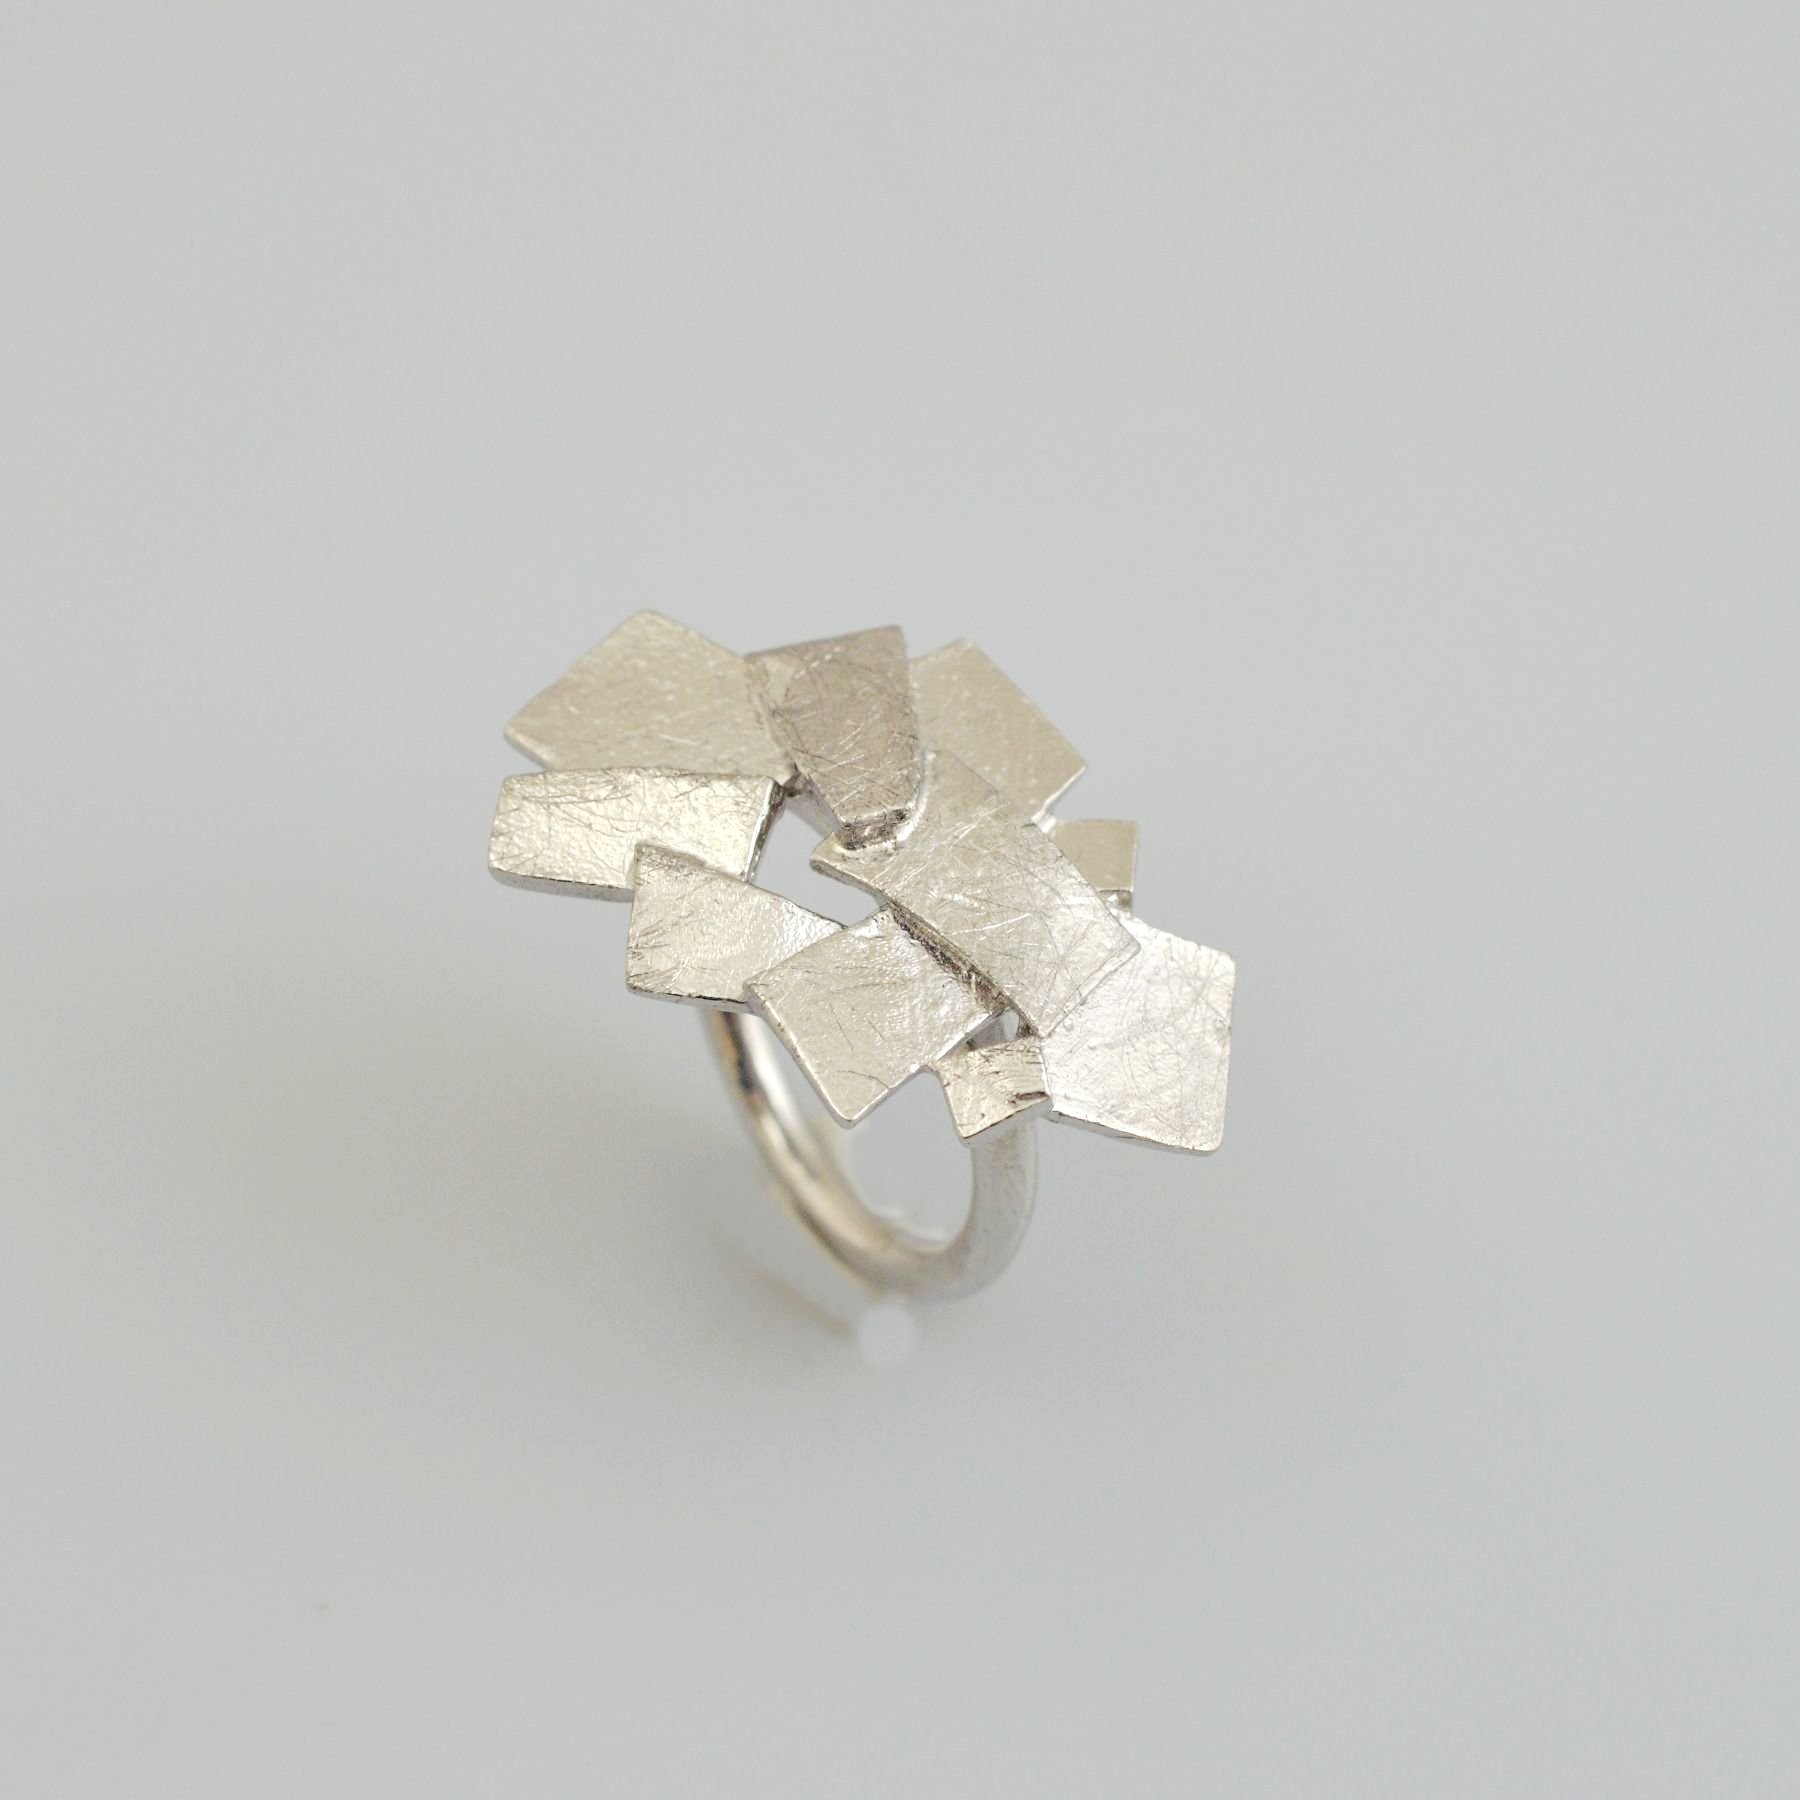 Silver ring 925 